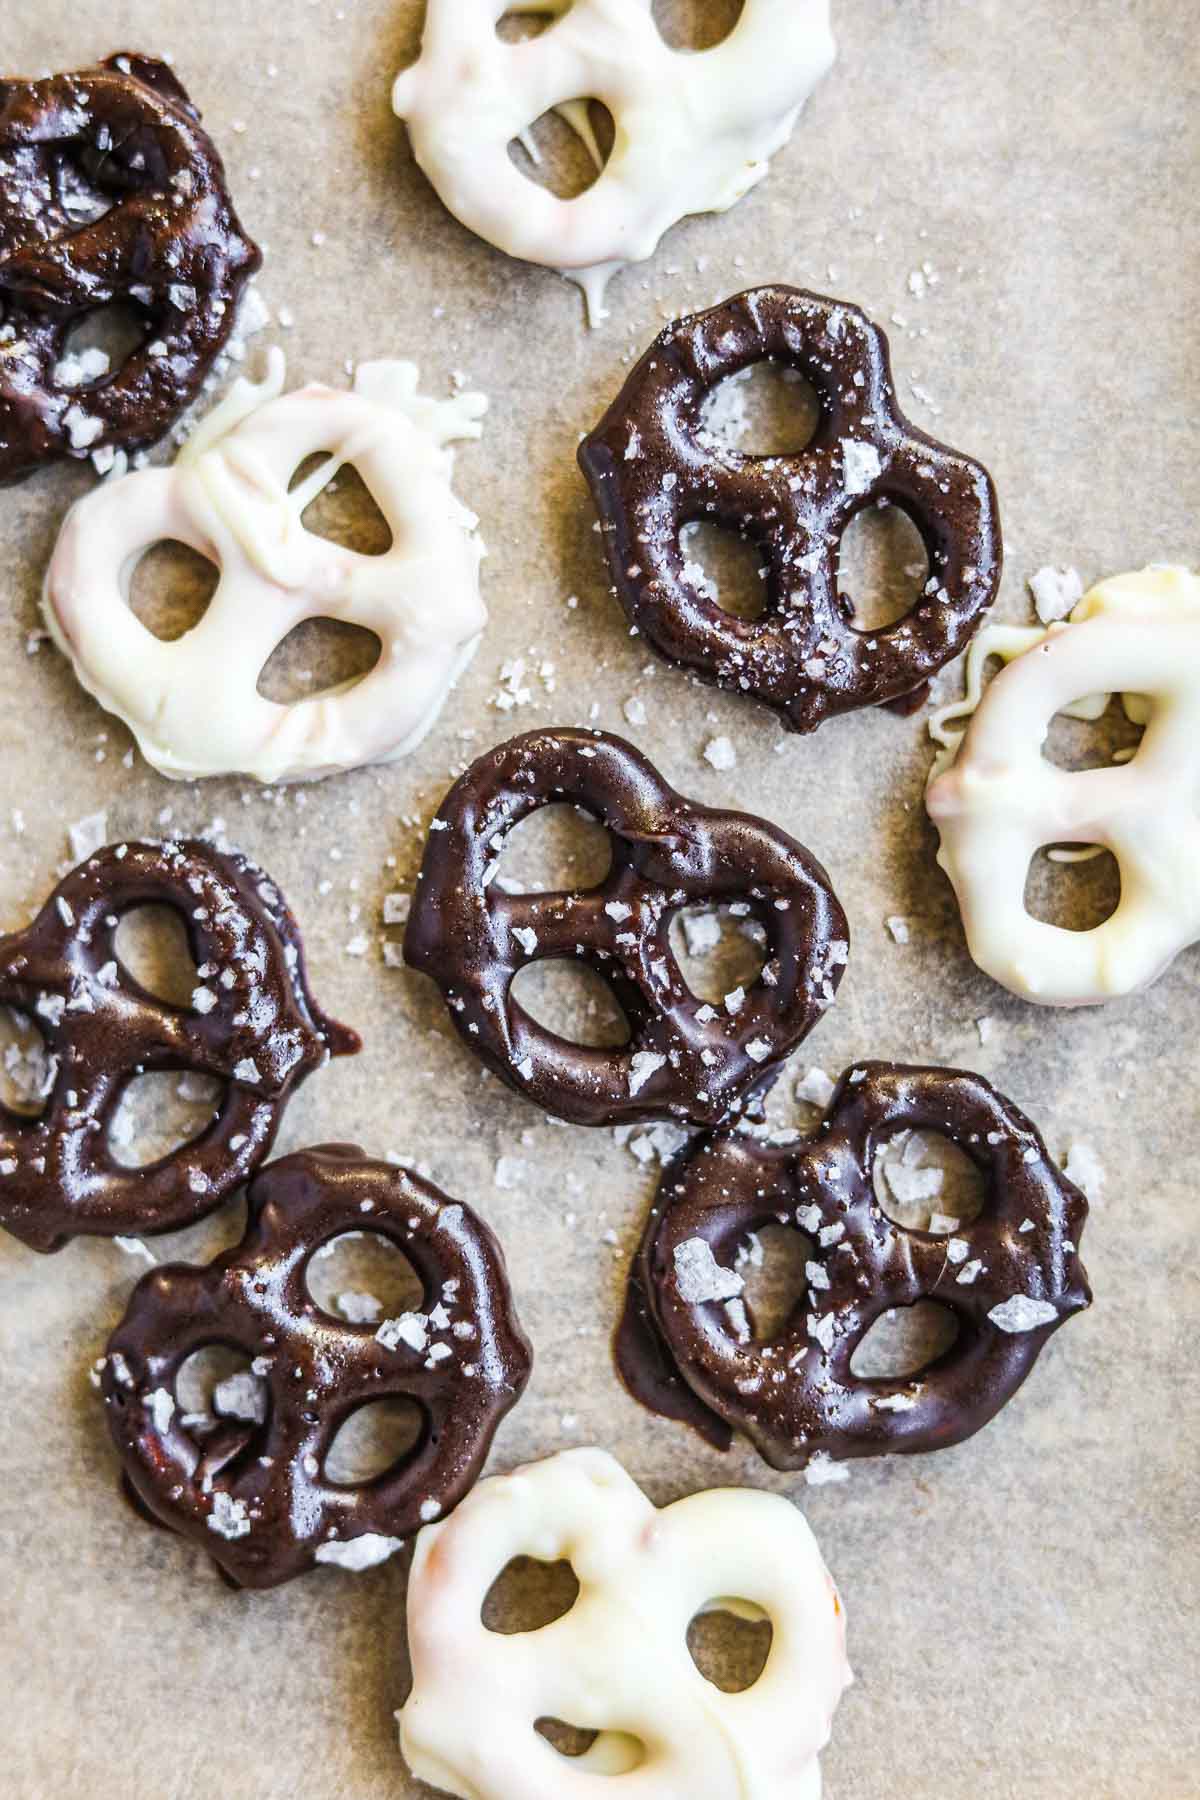 White and semi-sweet chocolate-covered pretzels with flaky sea salt on a sheet of parchment paper.